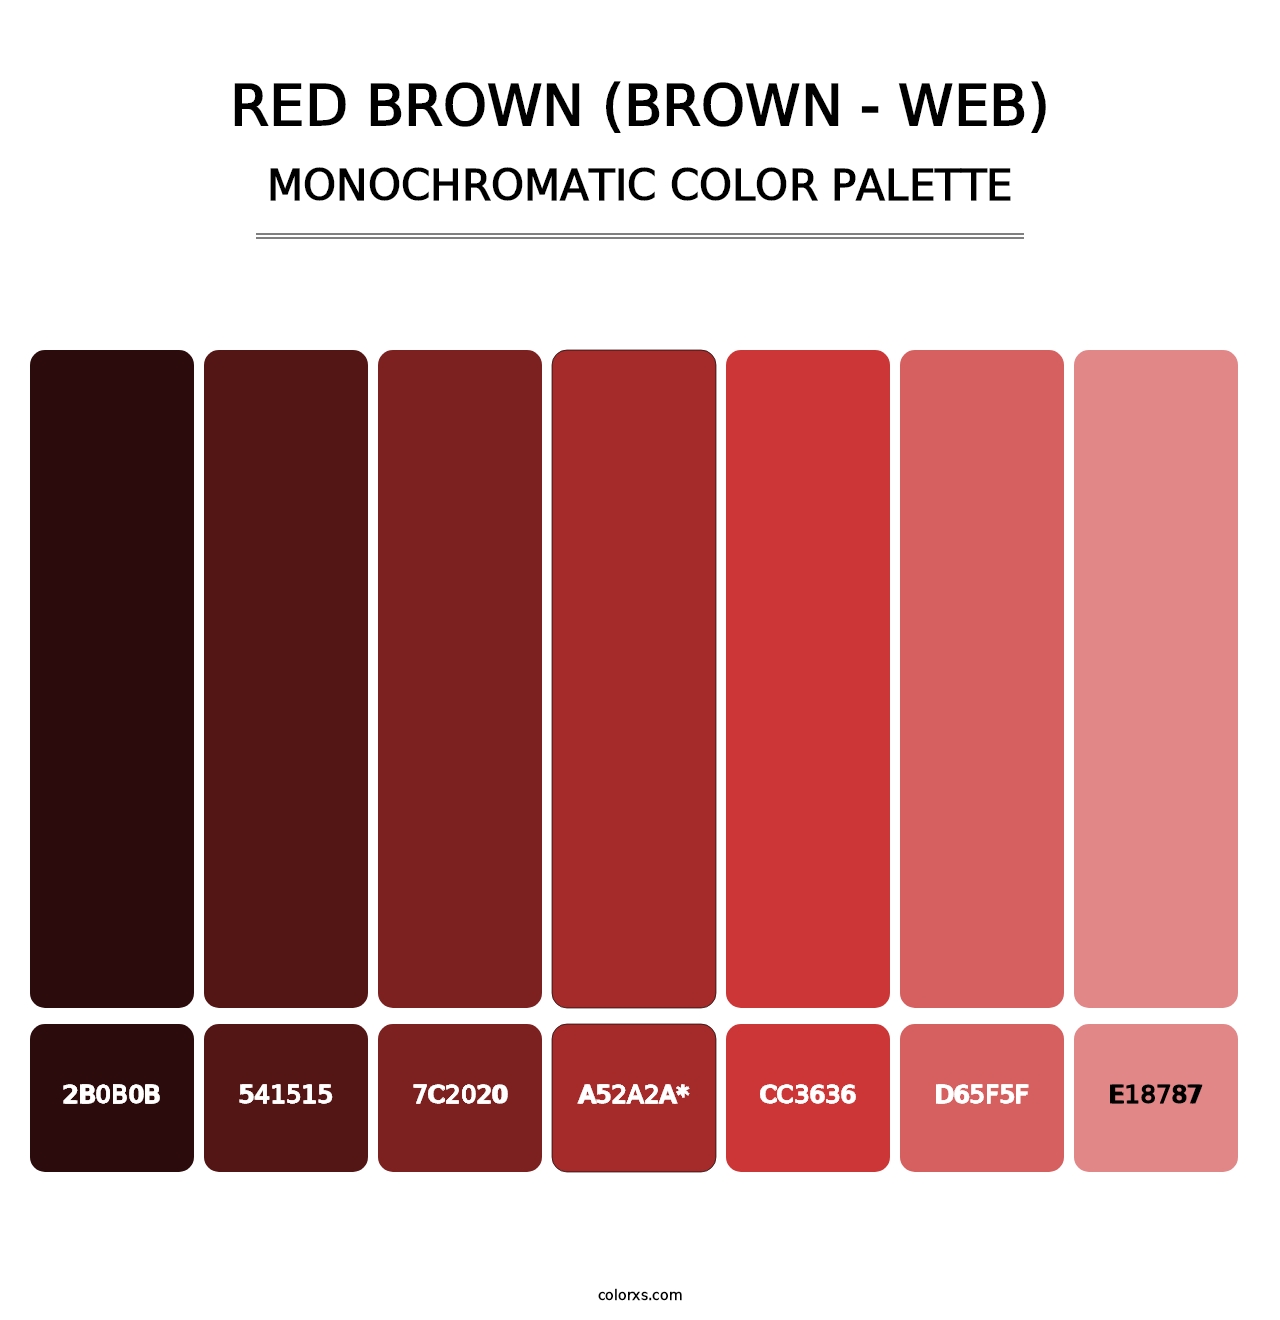 Red Brown (Brown - Web) - Monochromatic Color Palette